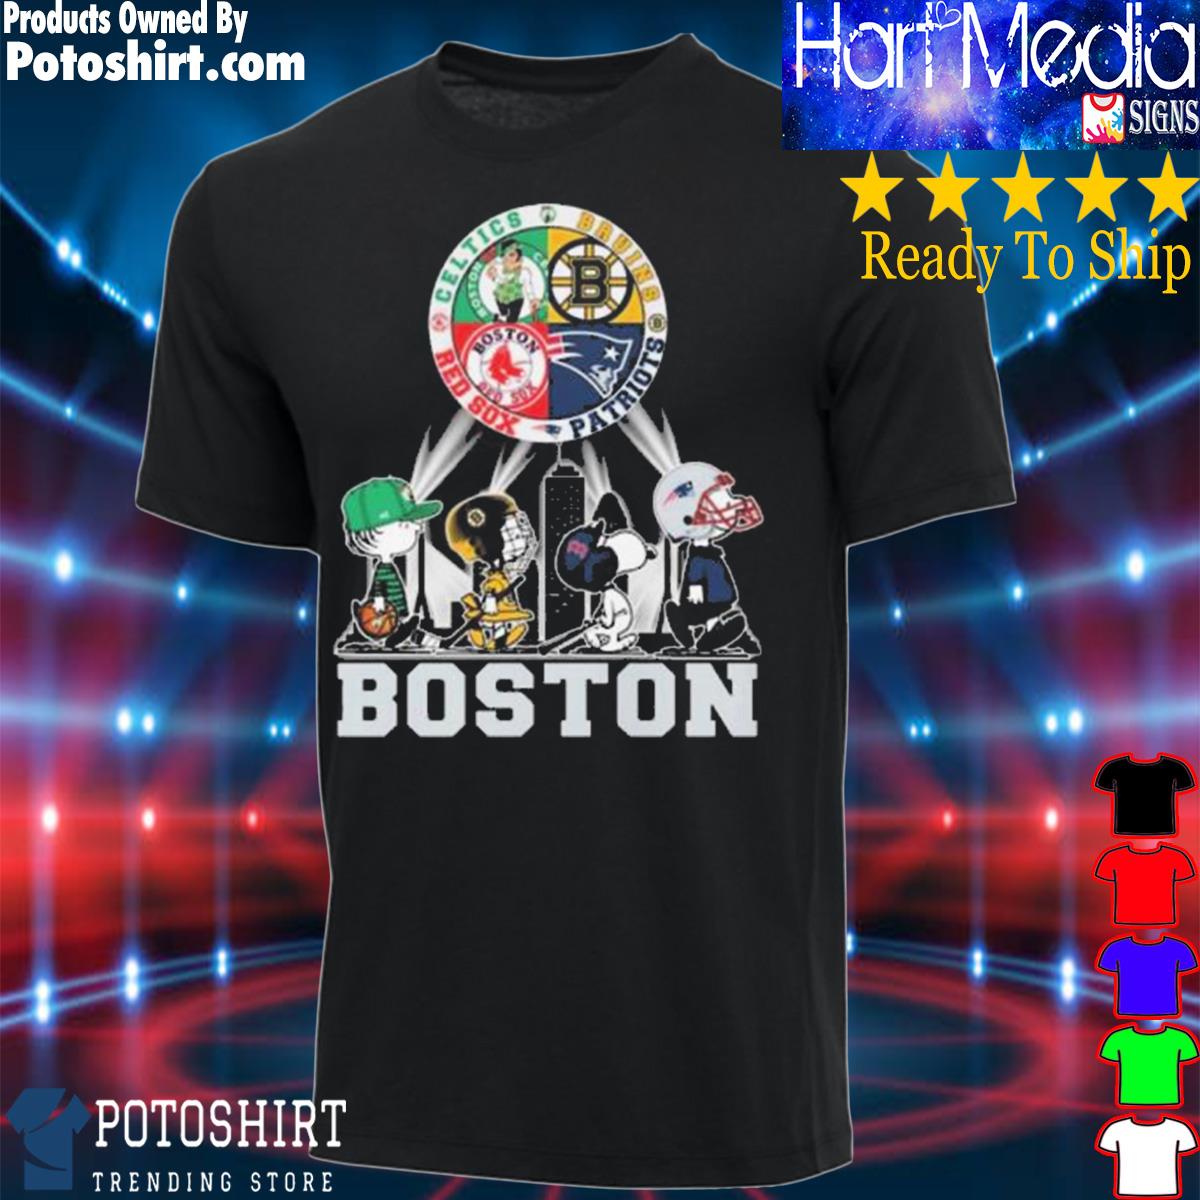 Product the Peanuts characters abbey road Boston sport team 2023